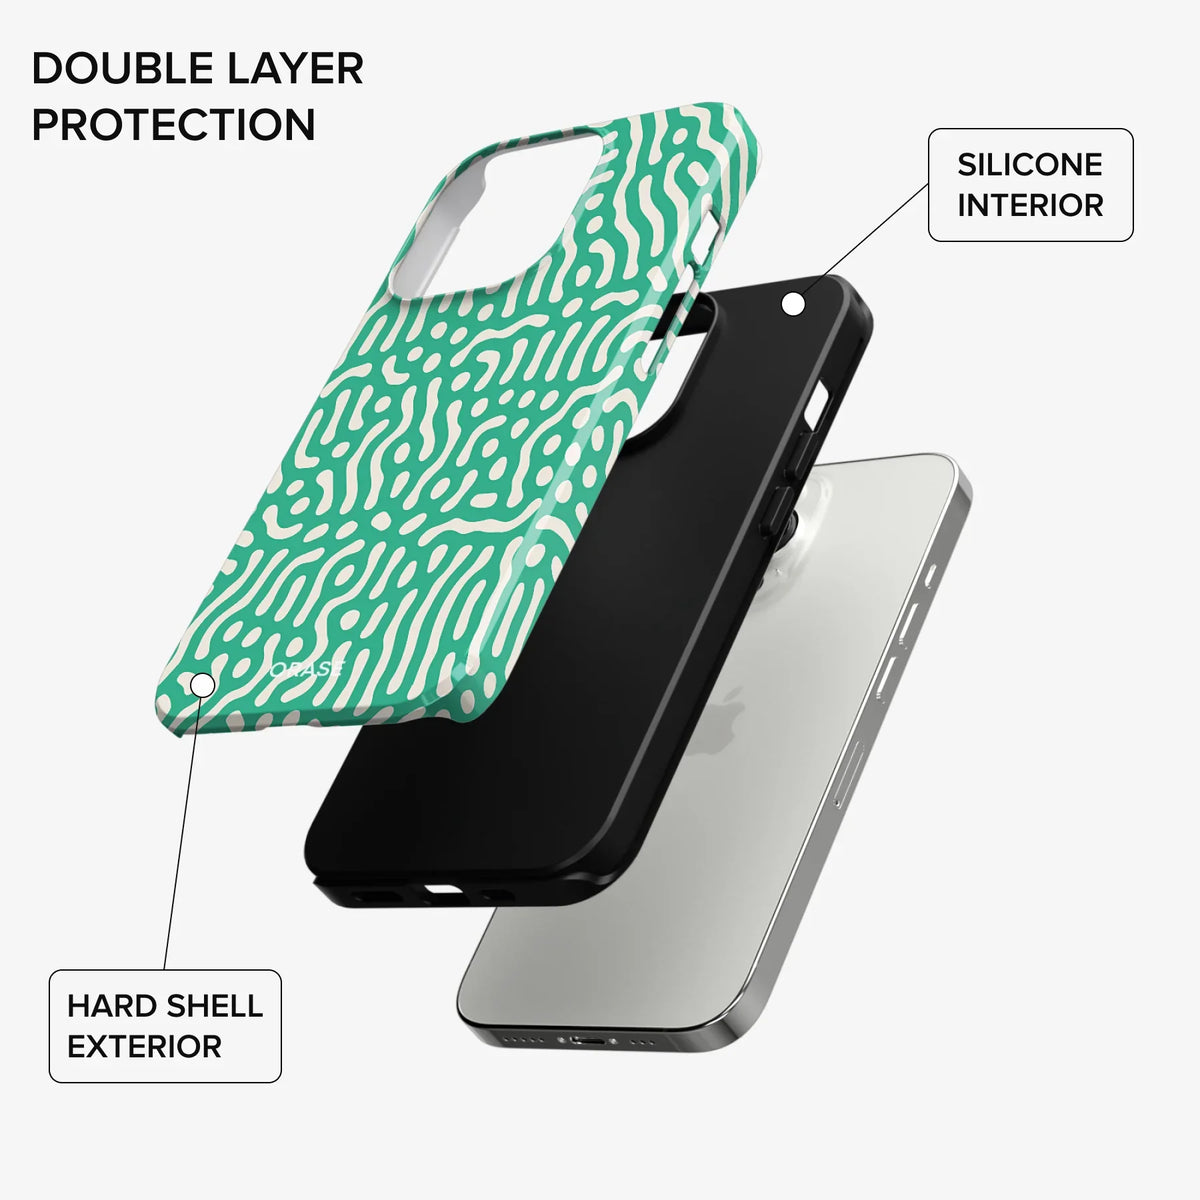 Lune Green iPhone Case - iPhone 12 Pro Max